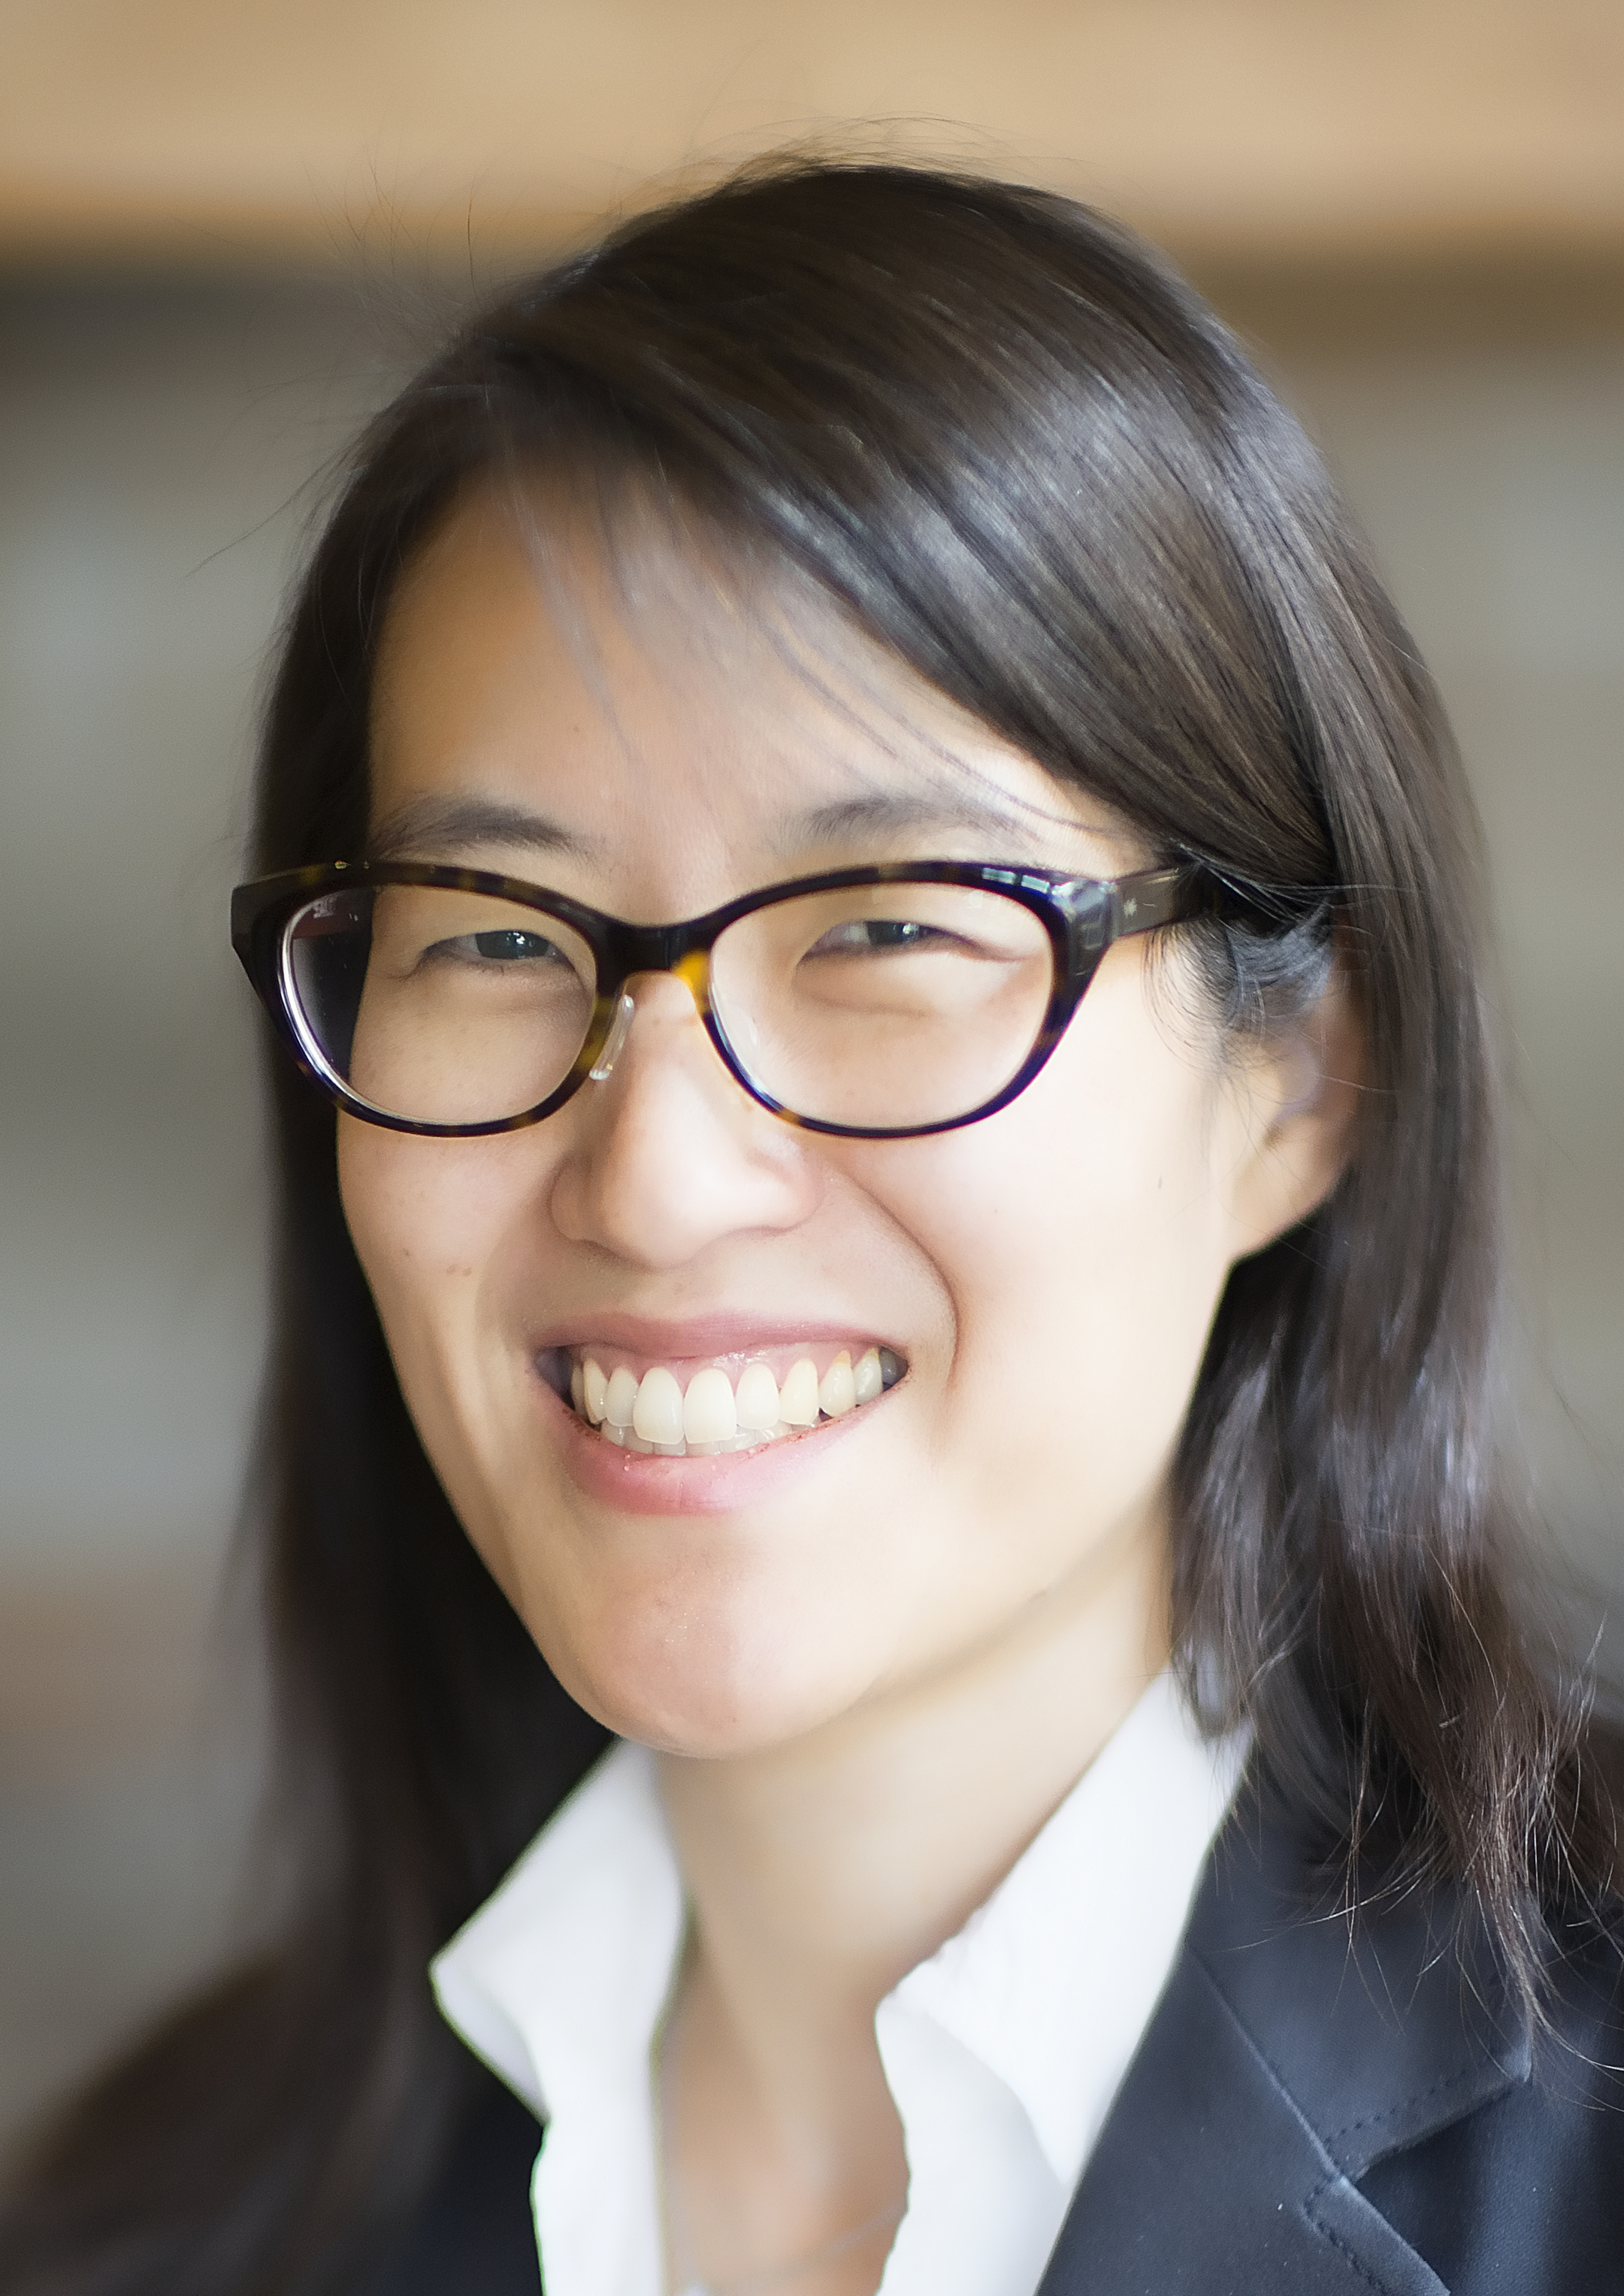 Reddit's Terrorists Have Won: Ellen Pao and the Failure to Rebrand Web 2.0  - The Daily Beast - Arthur Chu